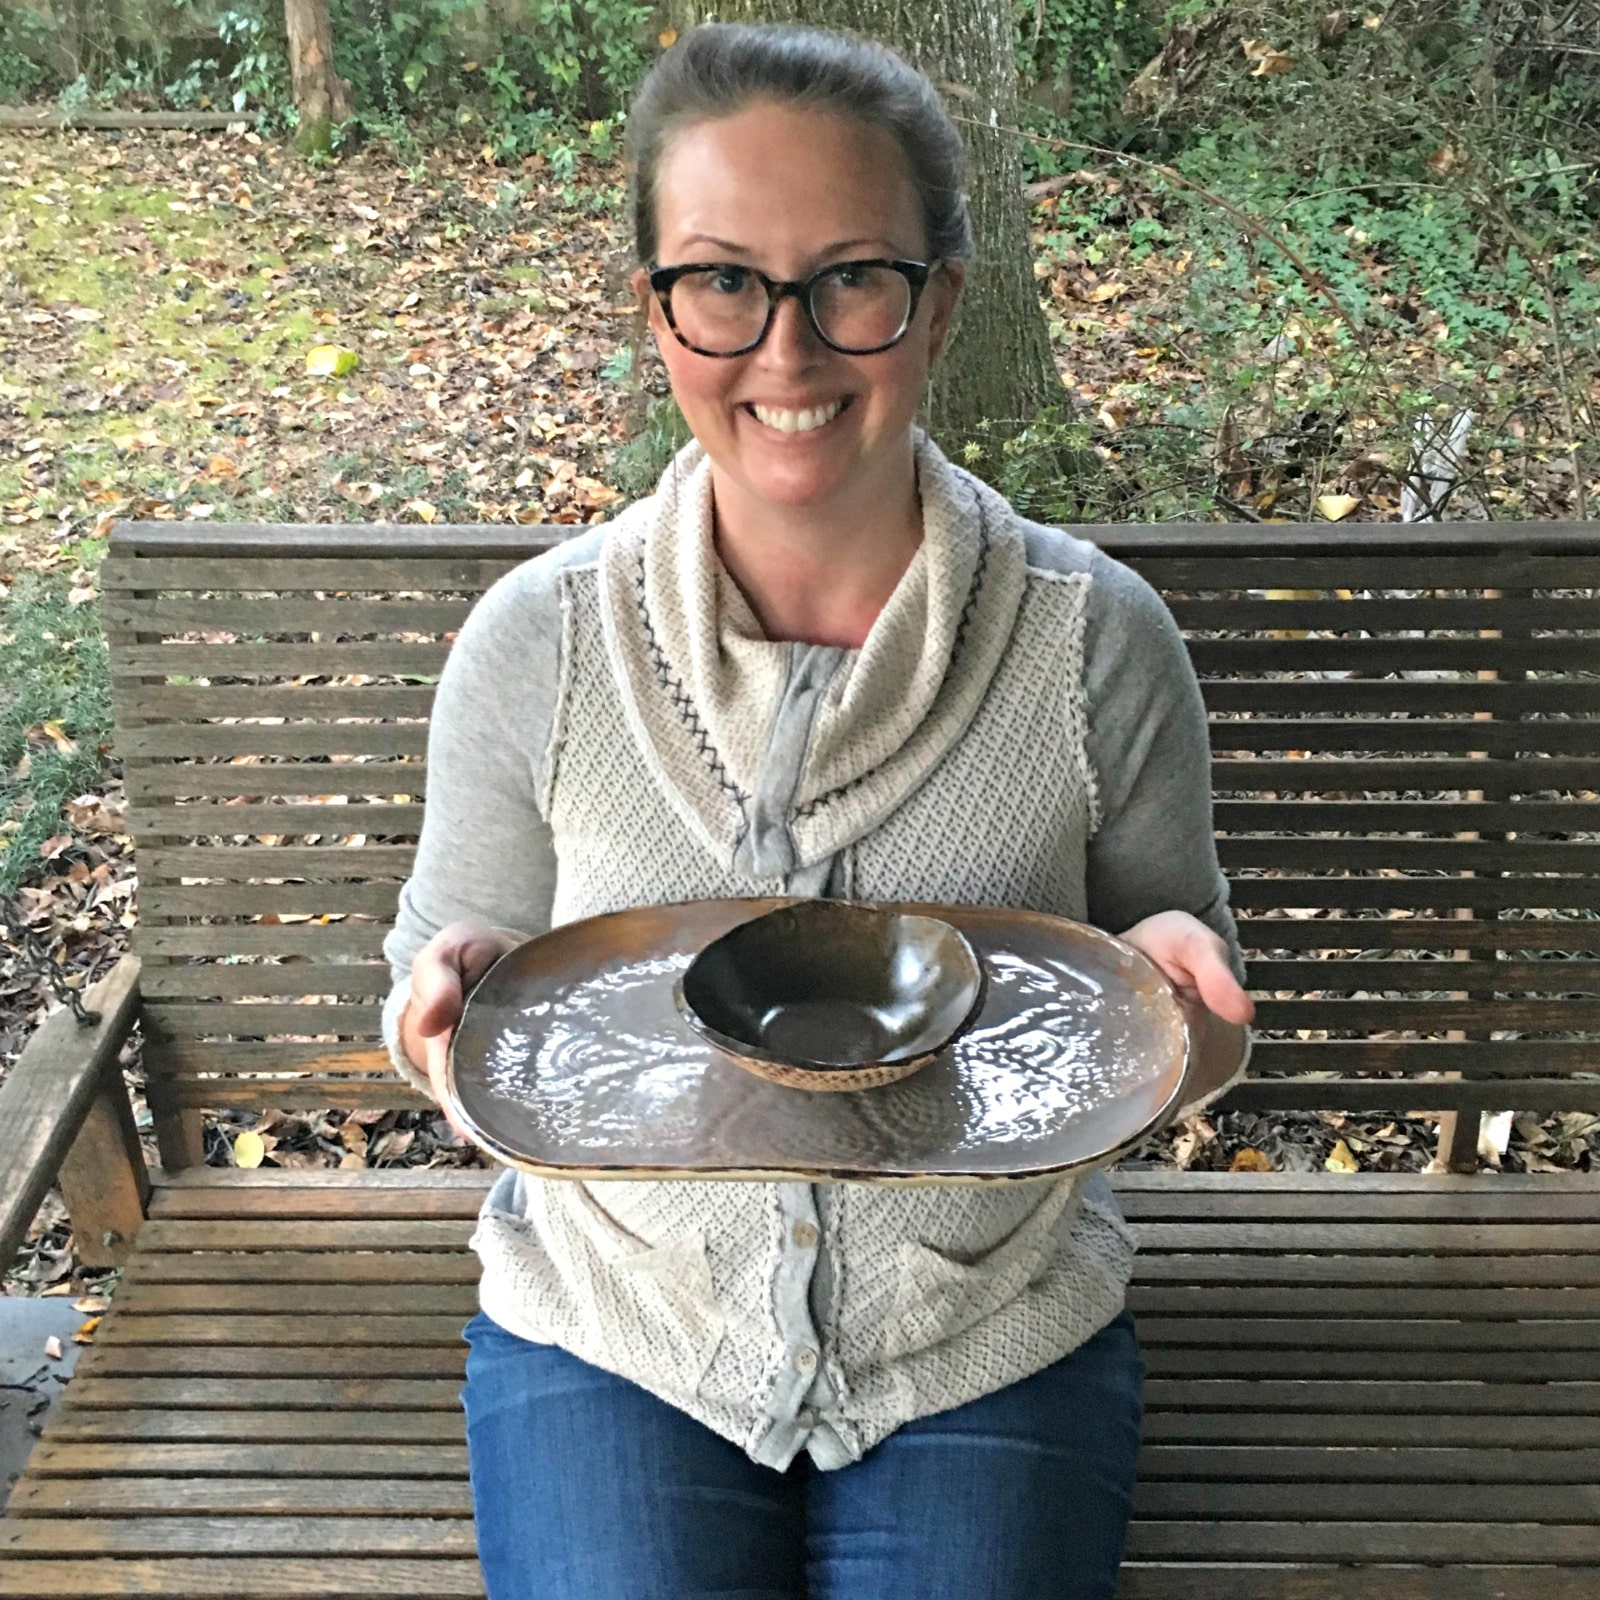 Jessica Sparks, one of the Roebuck Springs potters, on her home porch.